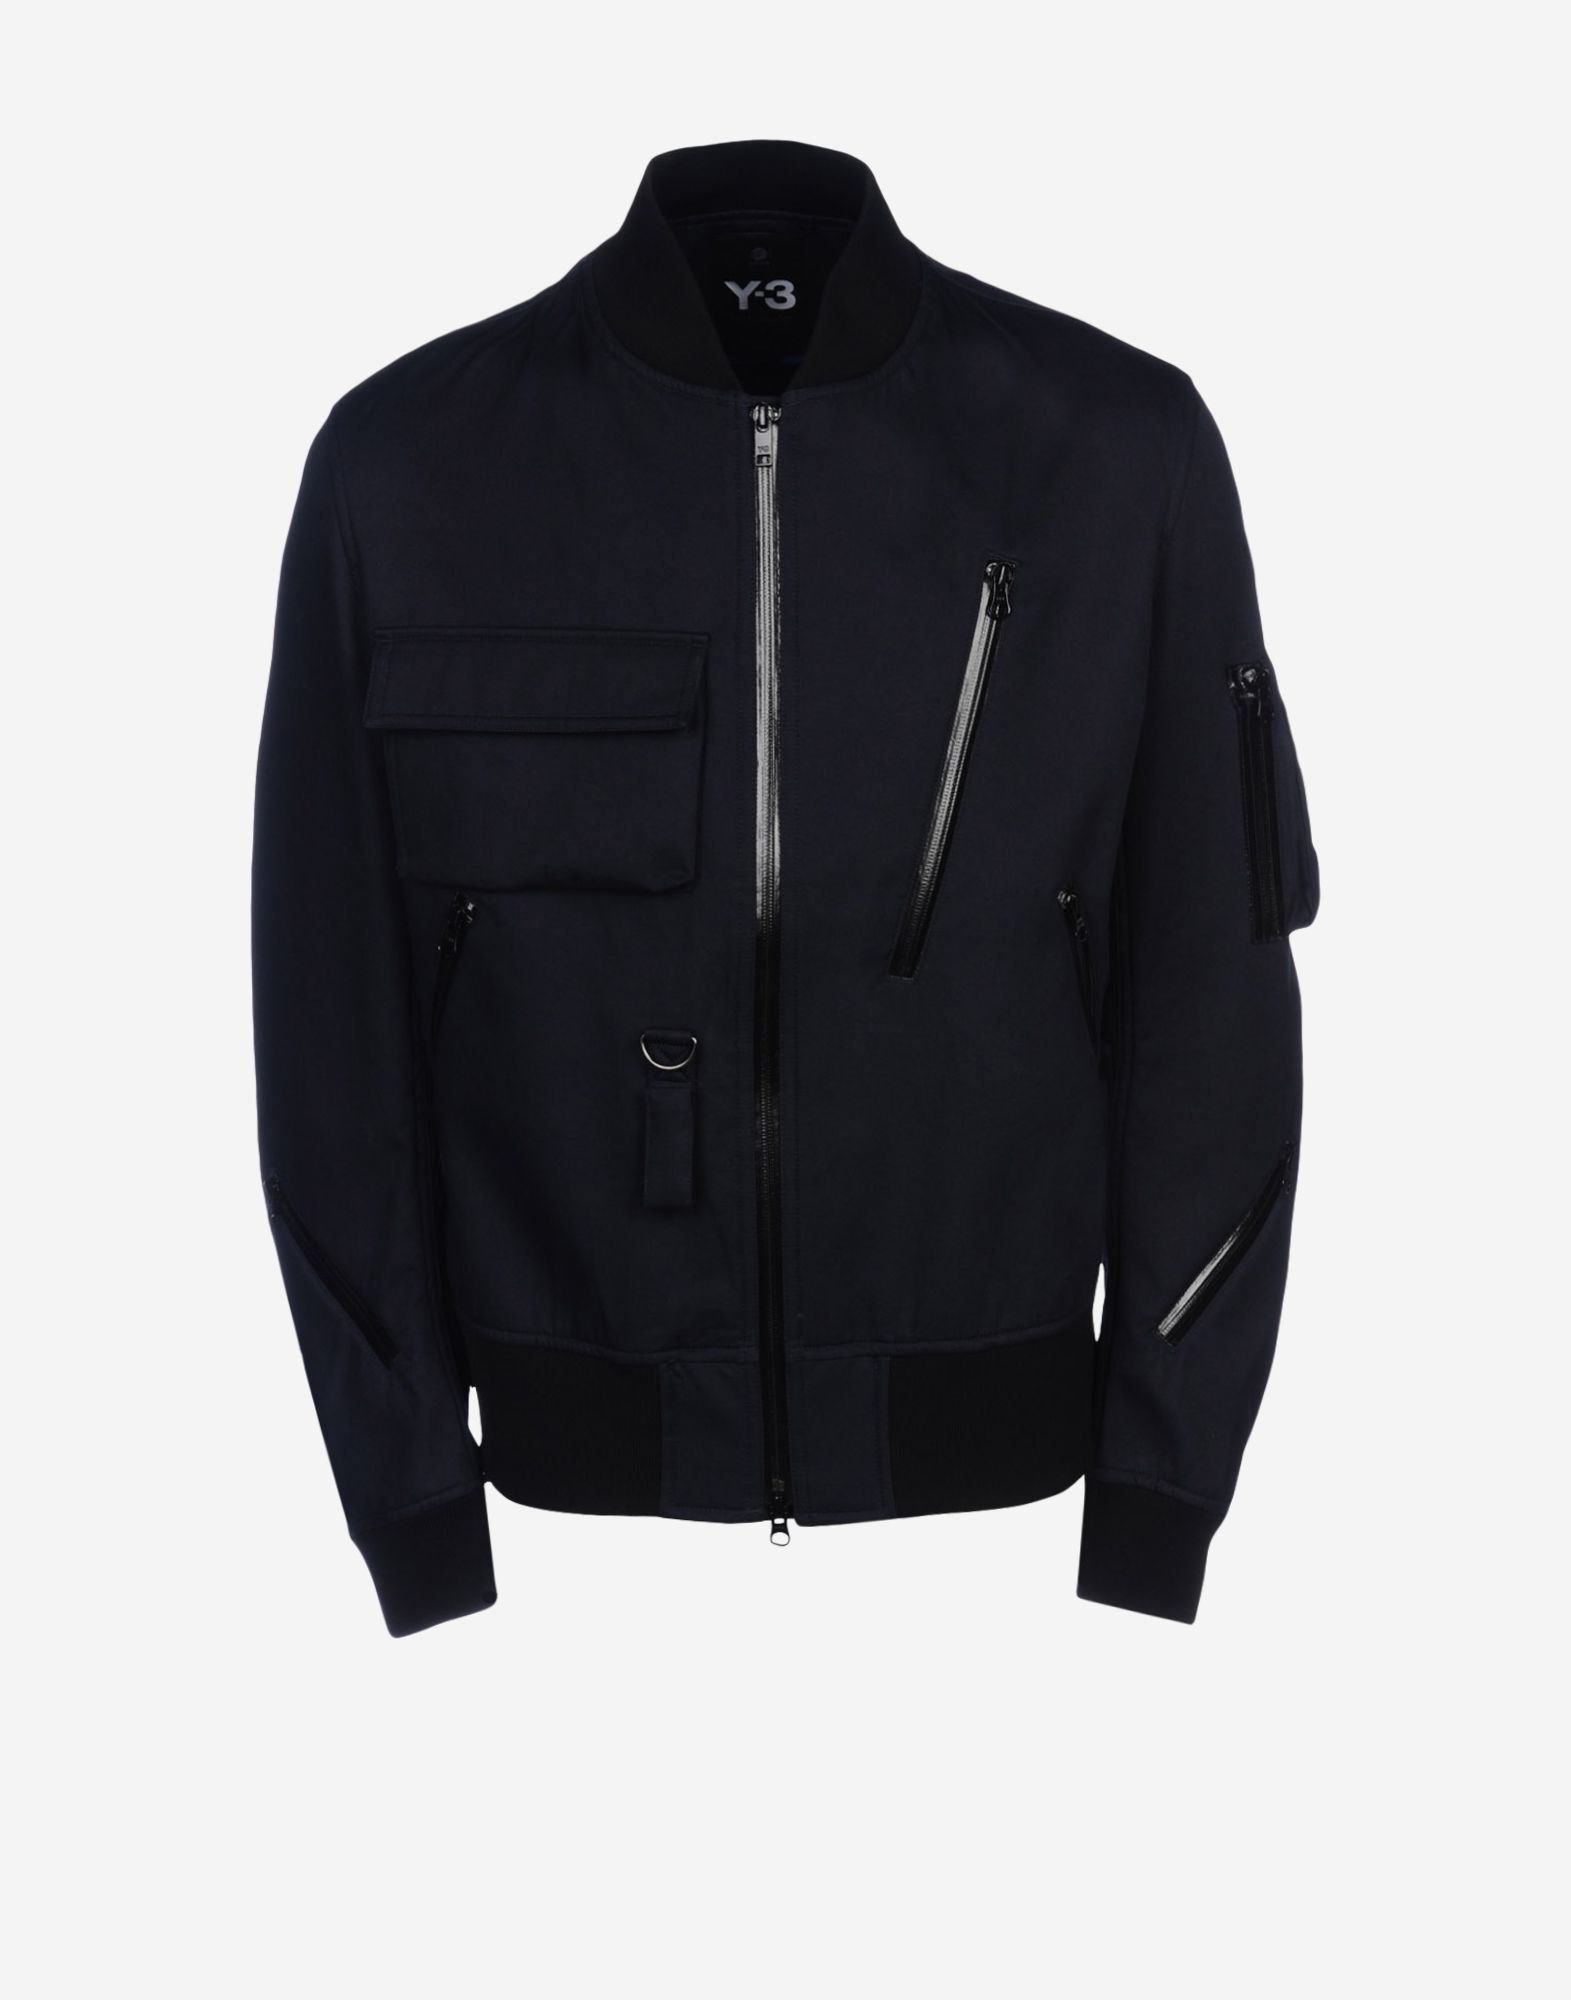 Y 3 3 Layer MA 1 Bomber for Men | Adidas Y-3 Official Store